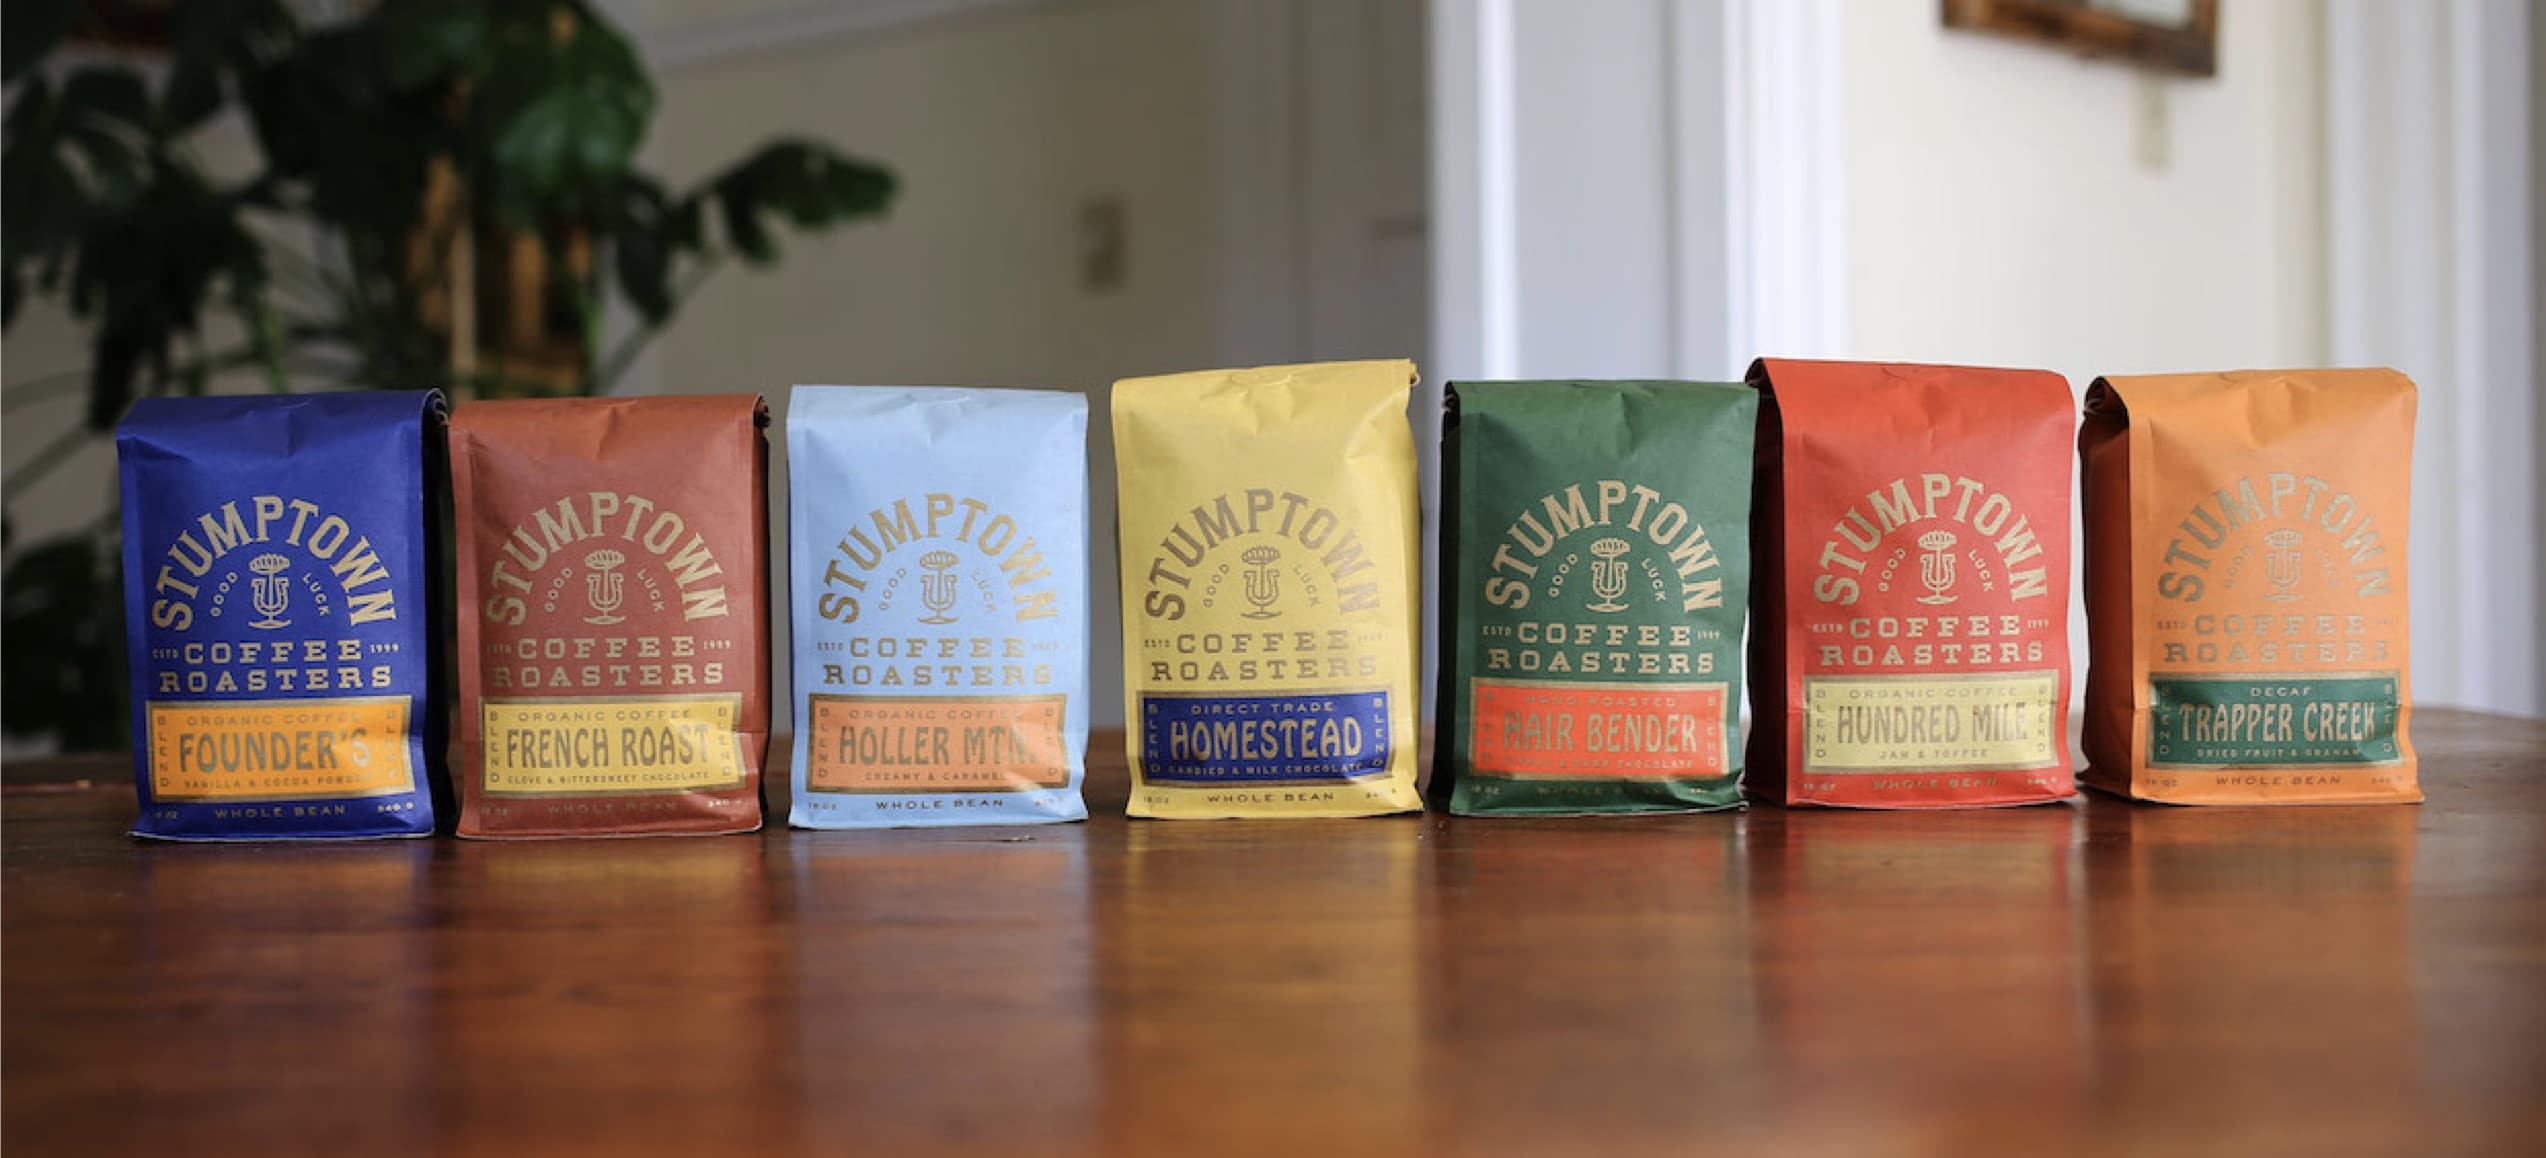 Stumptown's new packaging that show flavor notes